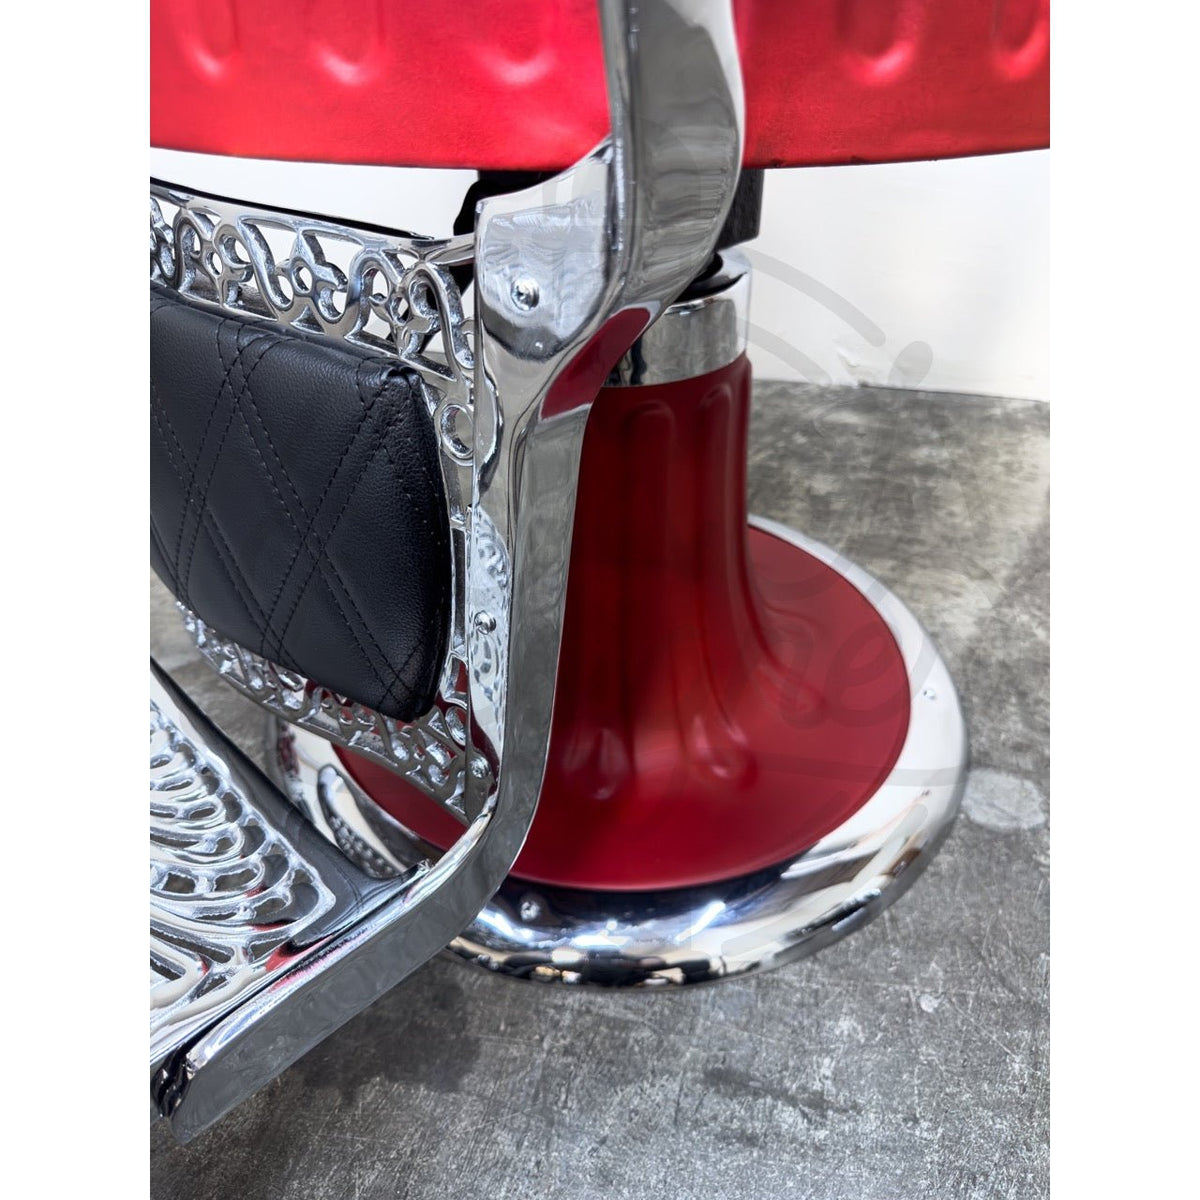 Vintage Round Seat Round Back Hercules - Chrome on Matte Illusion Red